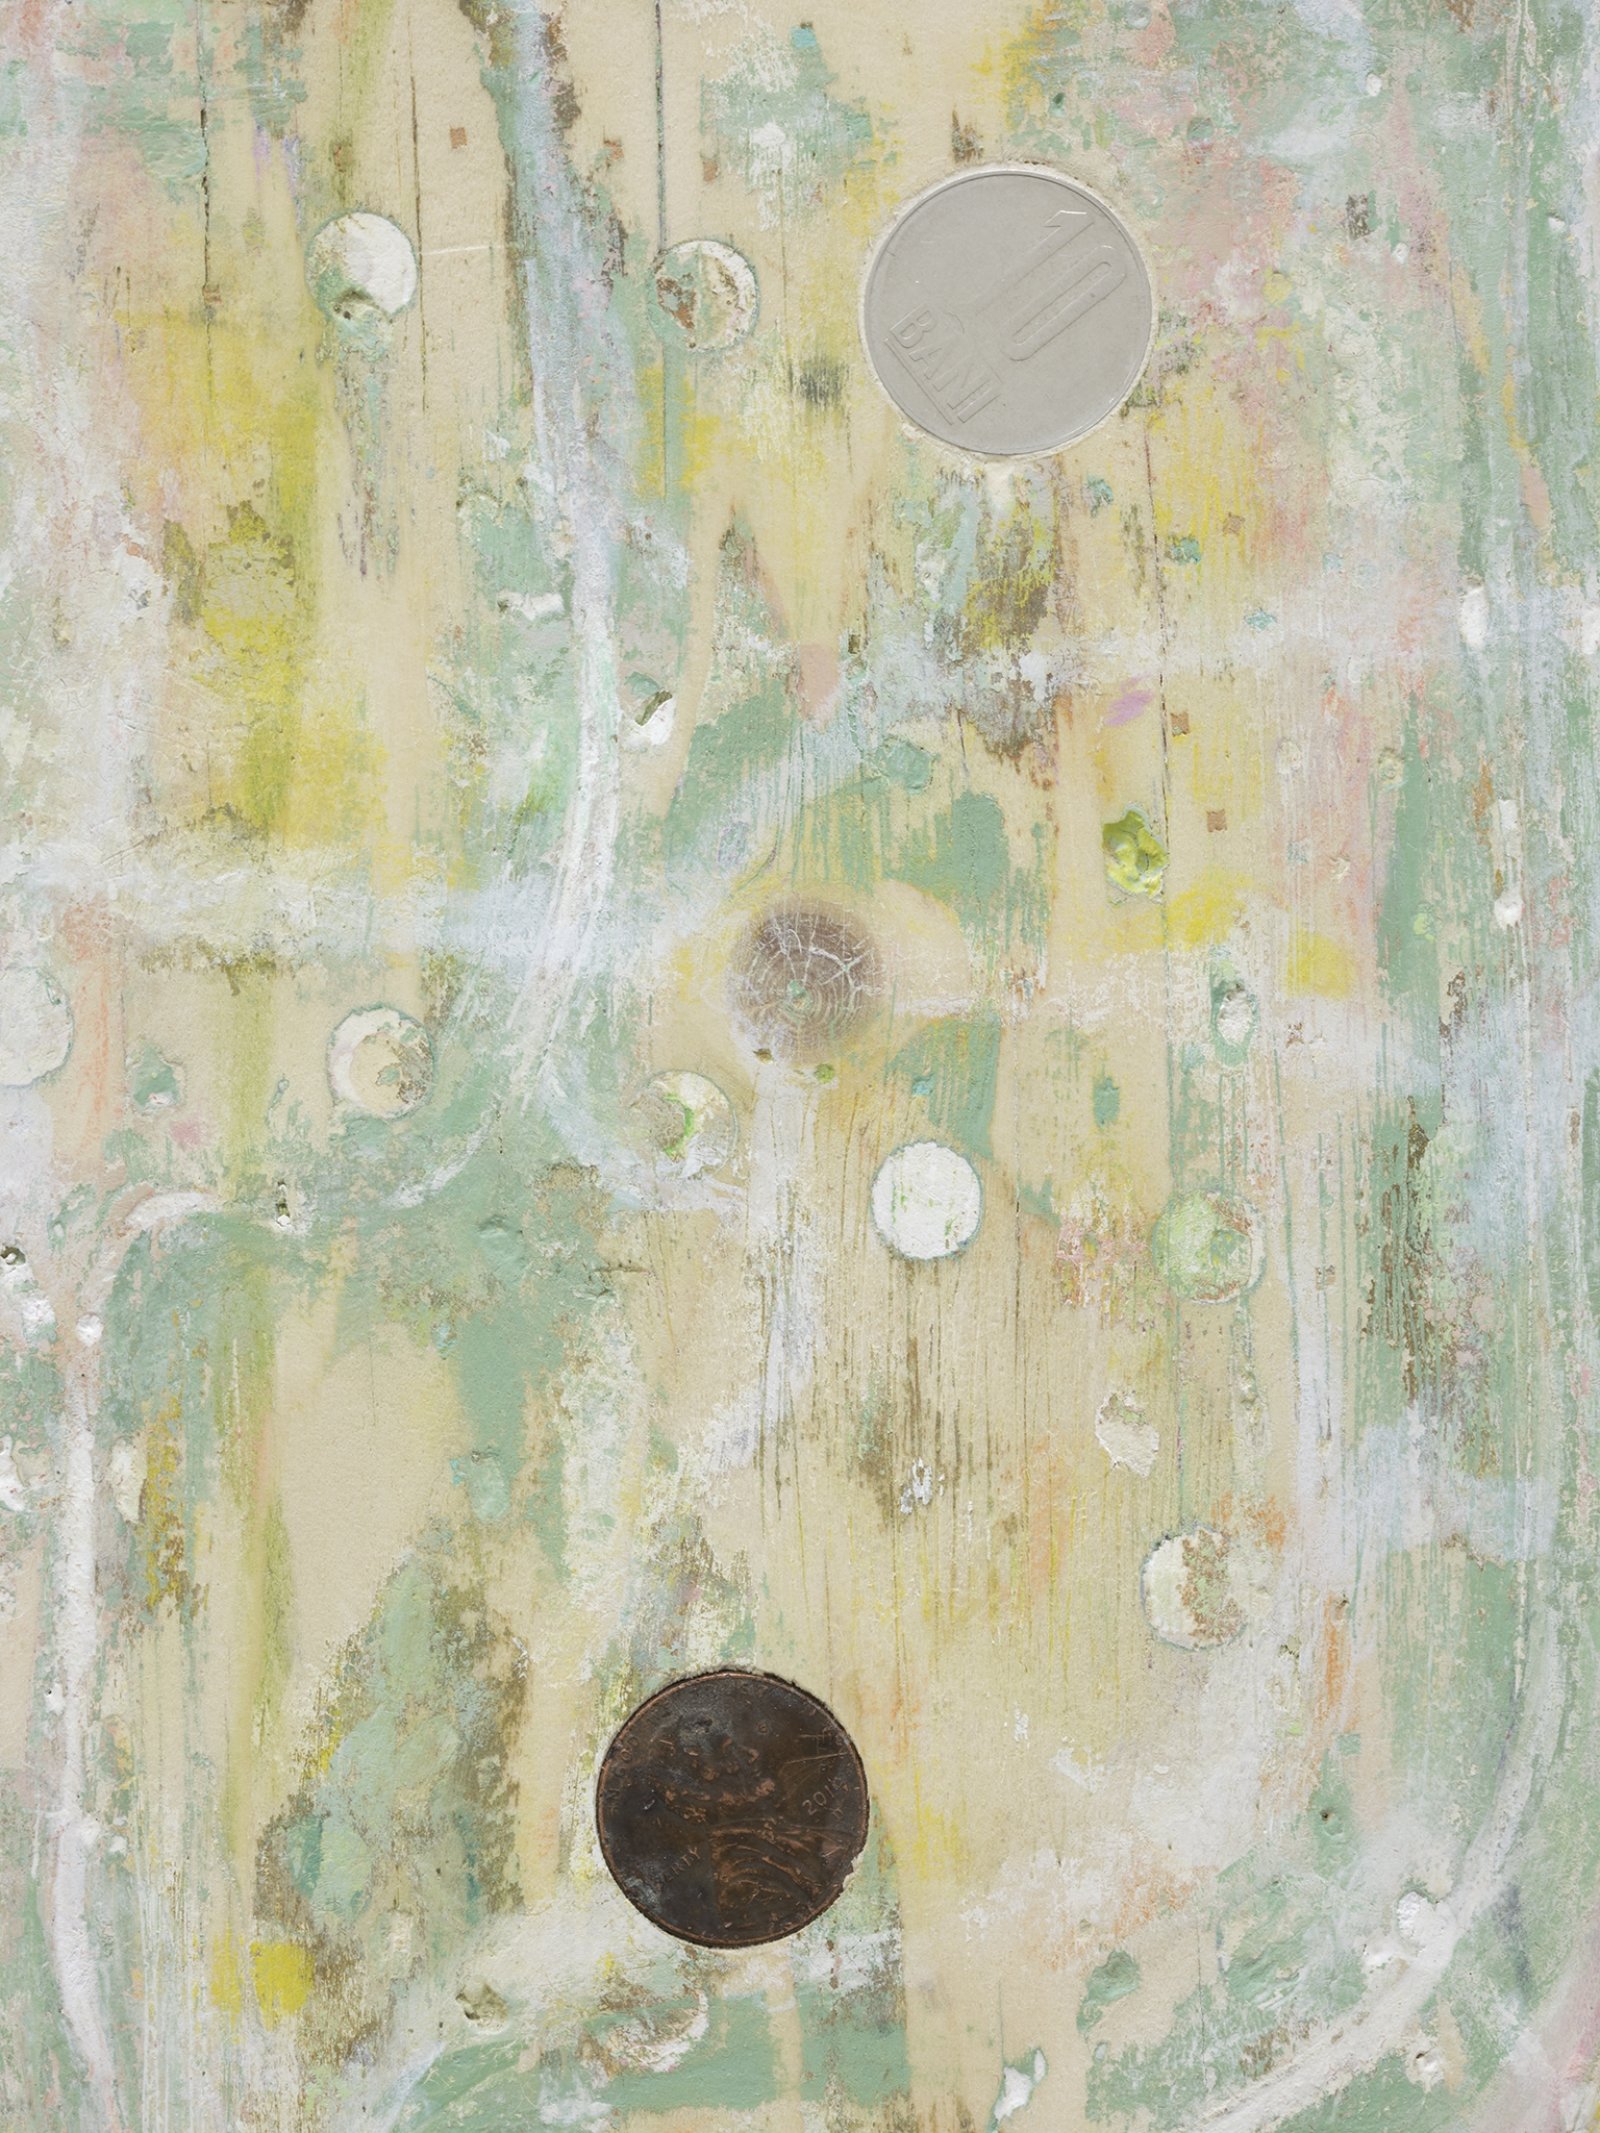 Ashes Withyman, Wordless song (detail), 2019, found wood, found paint, coloured pencil, wood filler, coins, 14 x 10 in. (34 x 25 cm)